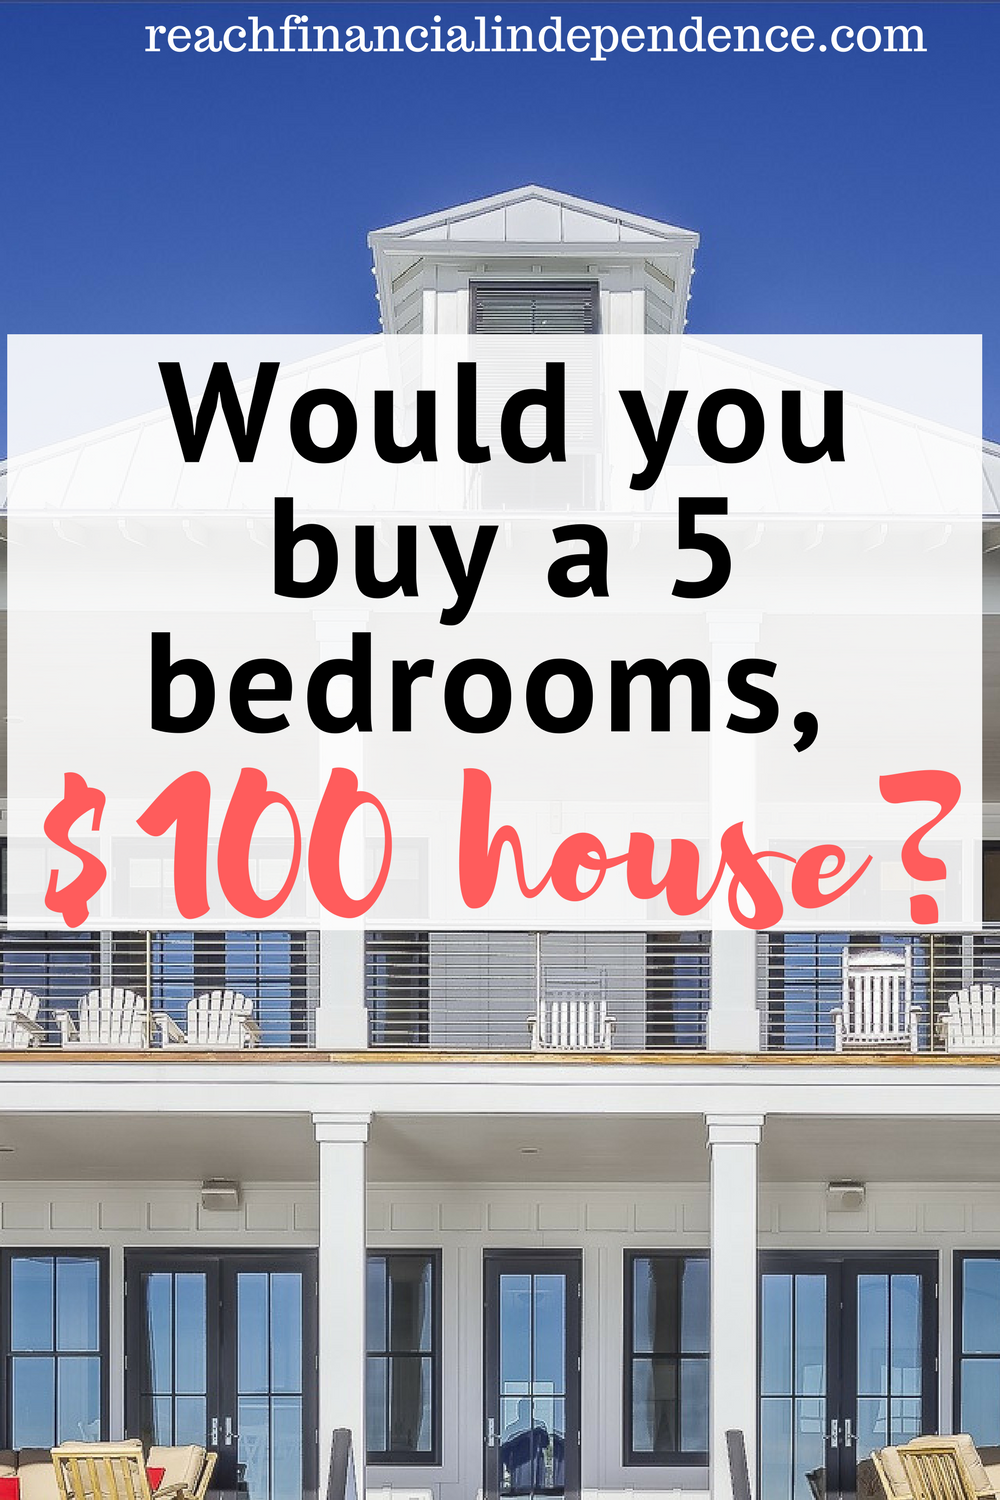 Would you buy a 5 bedrooms, $100 house: Stunning, this is really extremely enticing! Thanks for pinning!